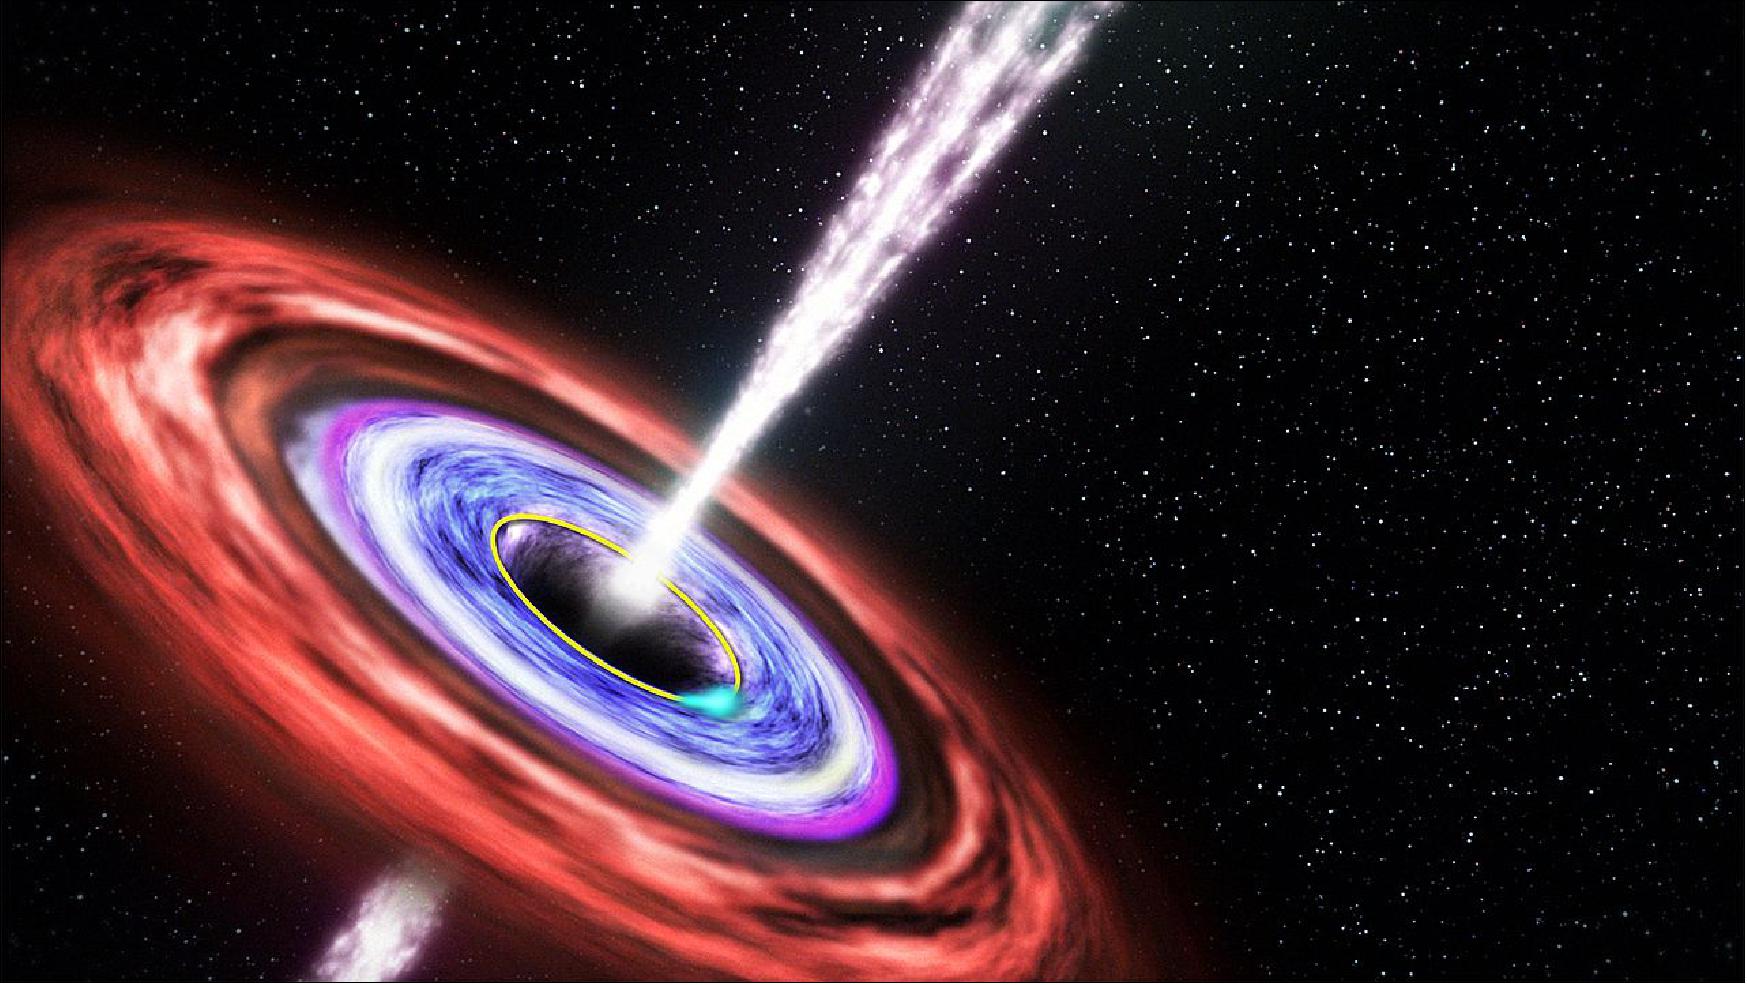 Figure 124: Quasi-periodic oscillations from a disrupted star being devoured by a supermassive black hole (image credit: NASA's Goddard Space Flight Center)